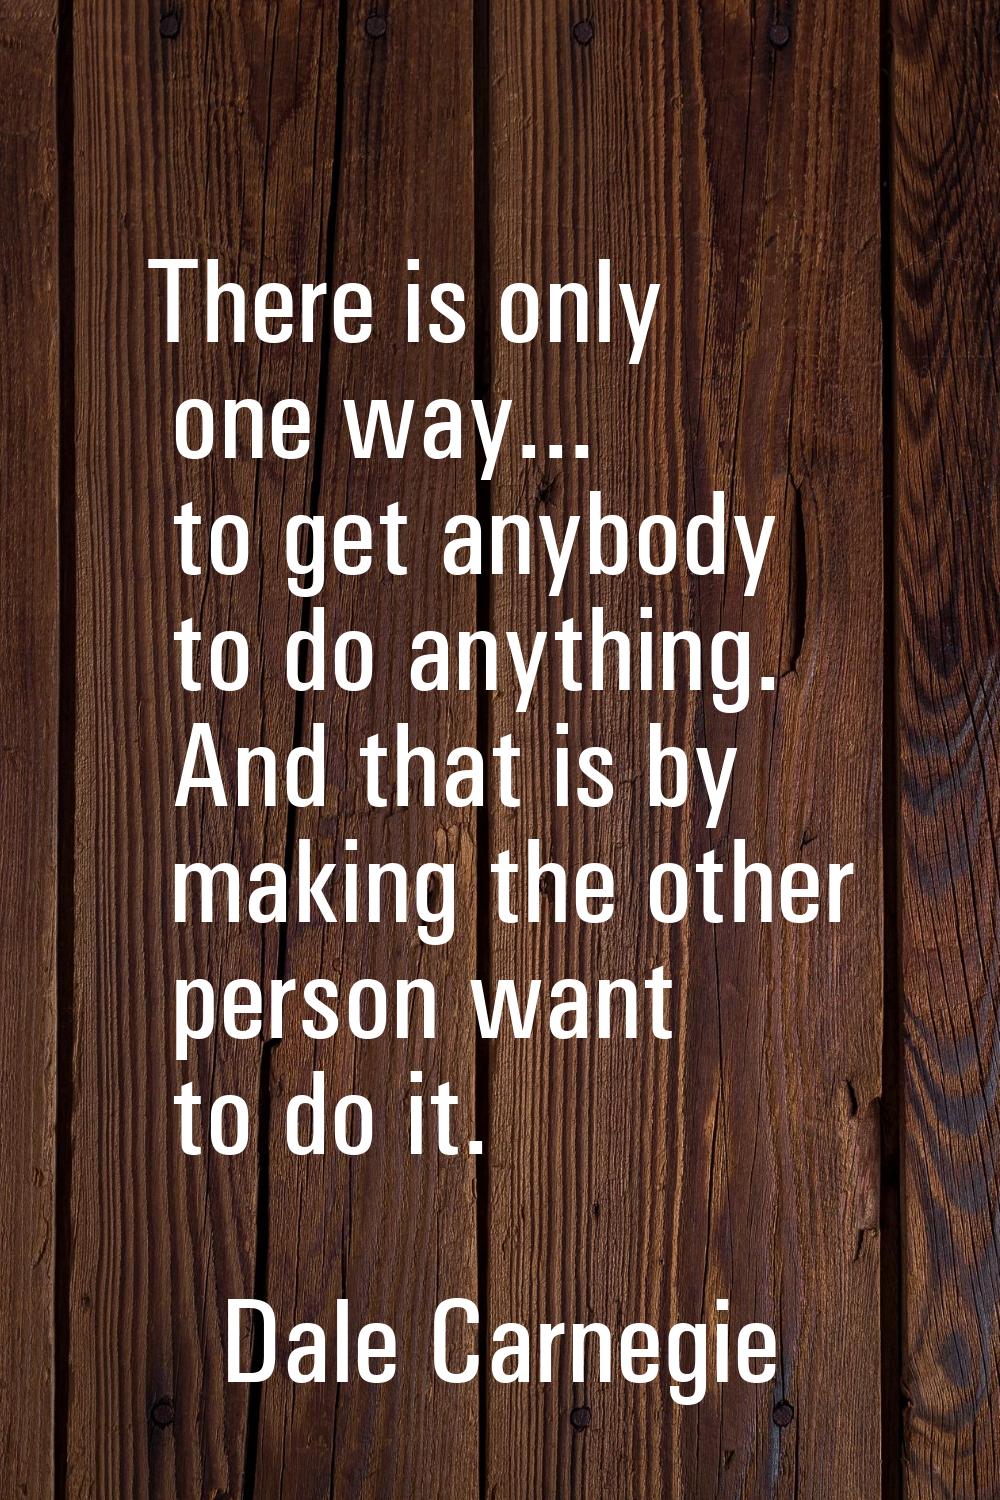 There is only one way... to get anybody to do anything. And that is by making the other person want